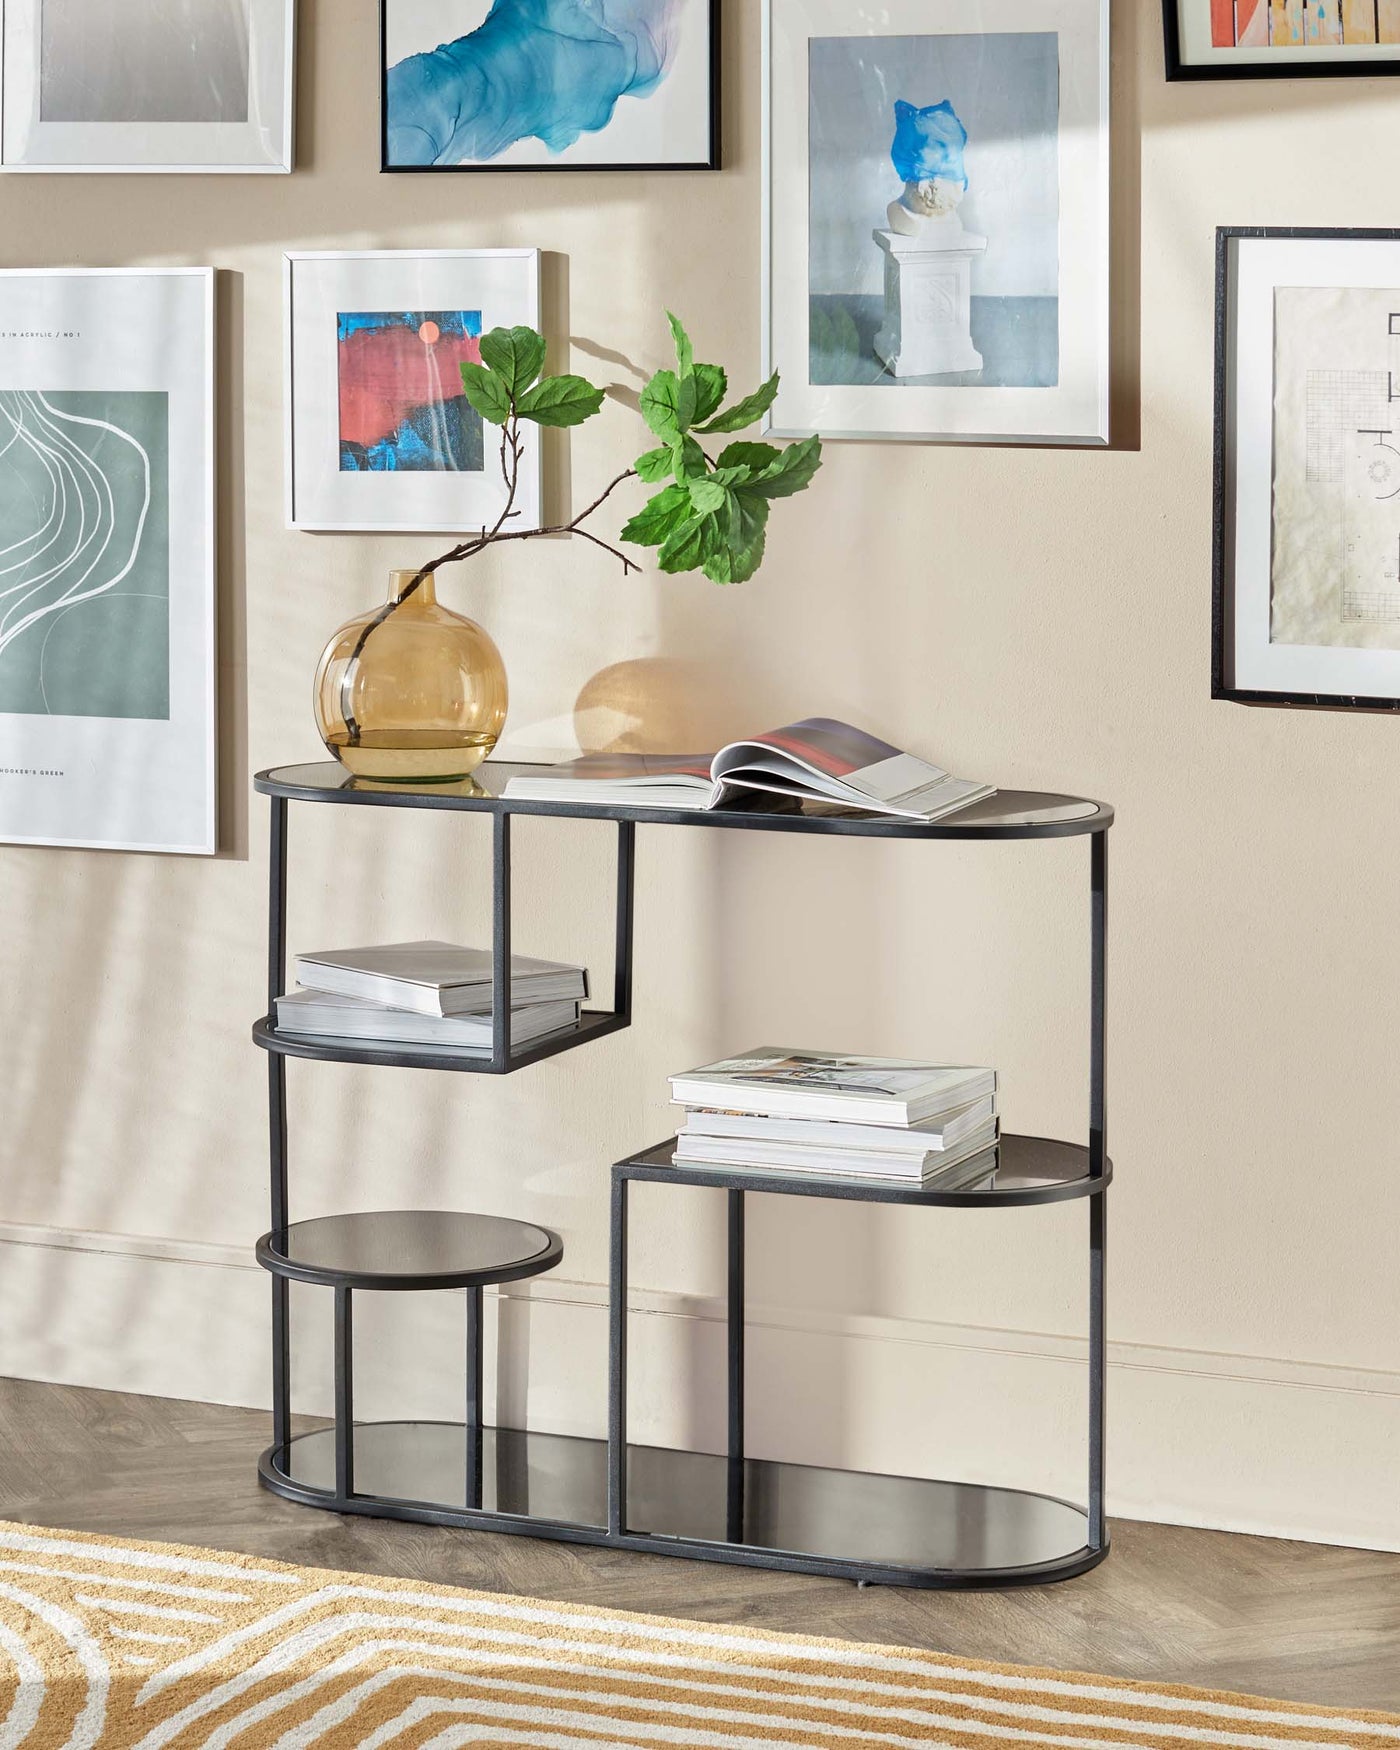 A modern asymmetrical metal and glass tiered console table with a semi-circular top, two rectangular shelves, and a smaller round side table attached at the bottom.